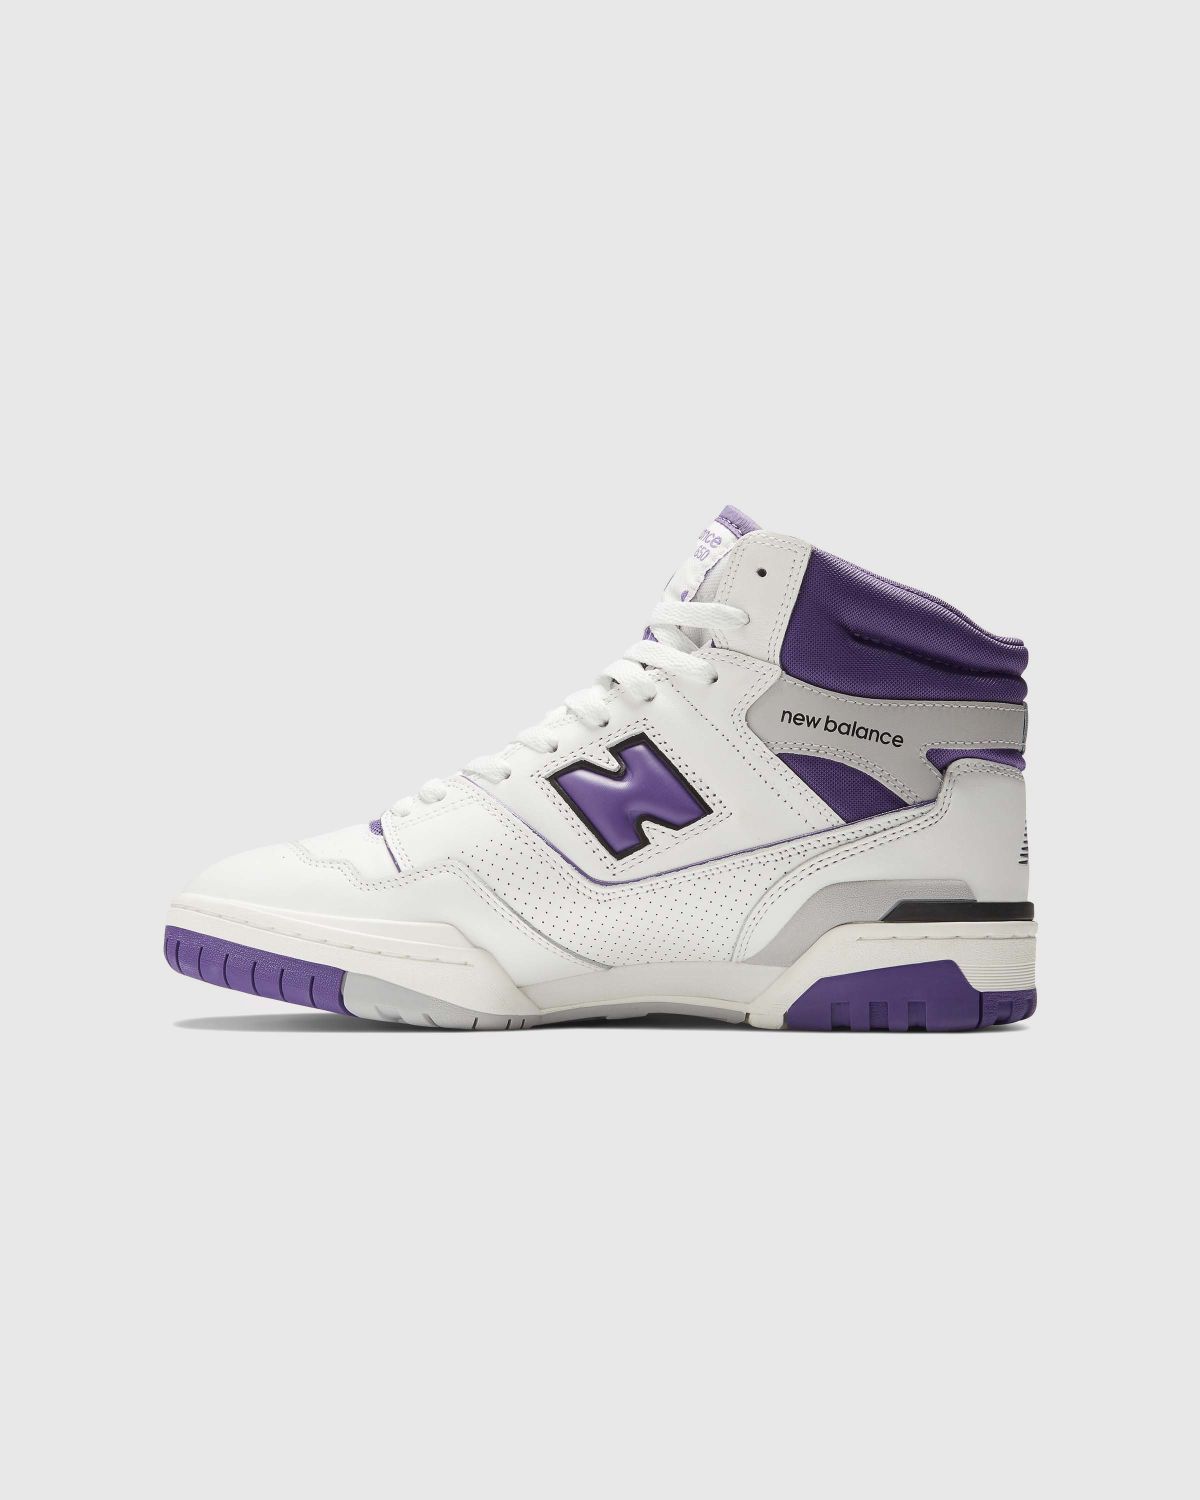 New Balance – BB650RCF White - High Top Sneakers - White - Image 2